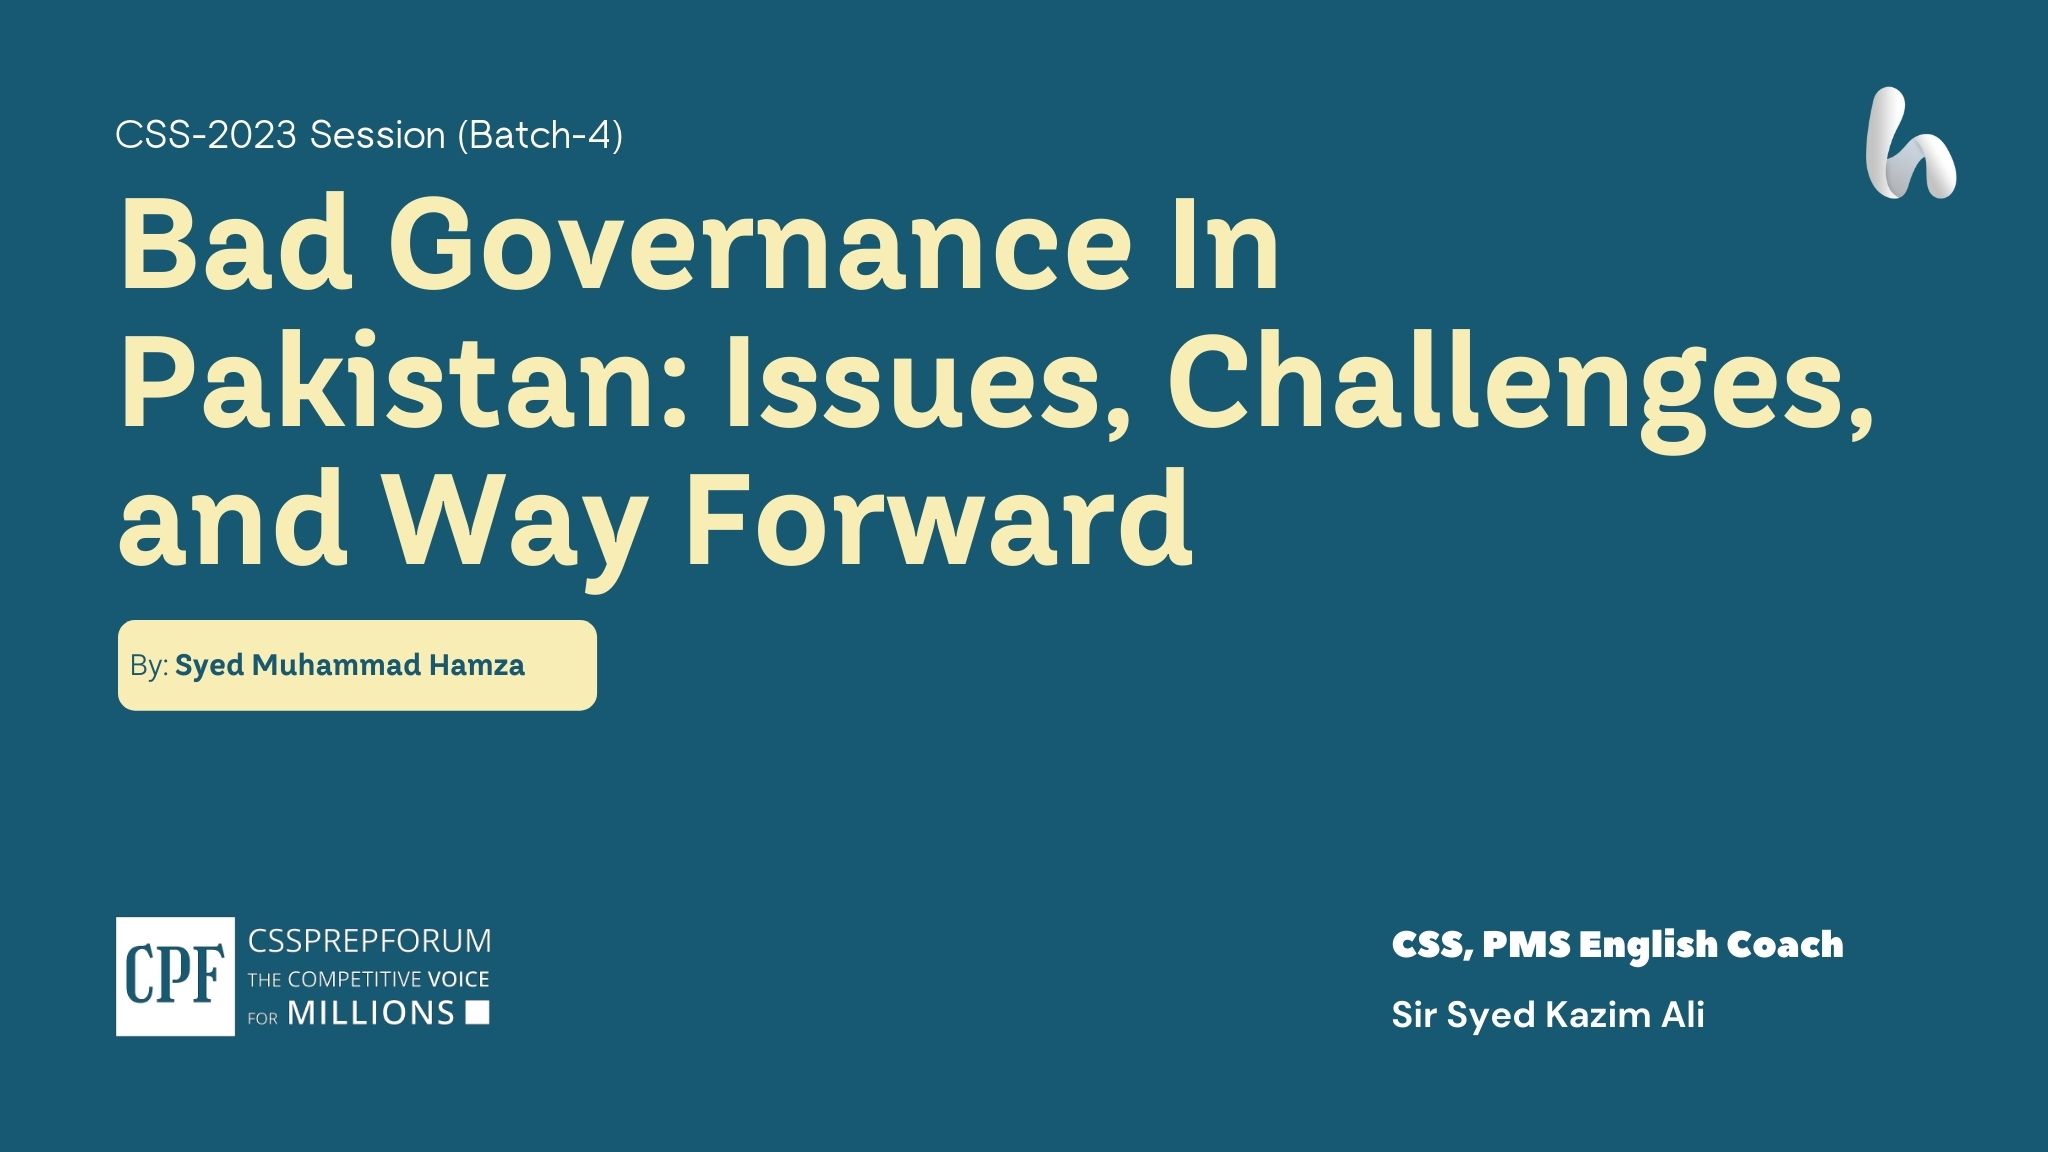 Bad Governance In Pakistan: Issues, Challenges, and Way Forward